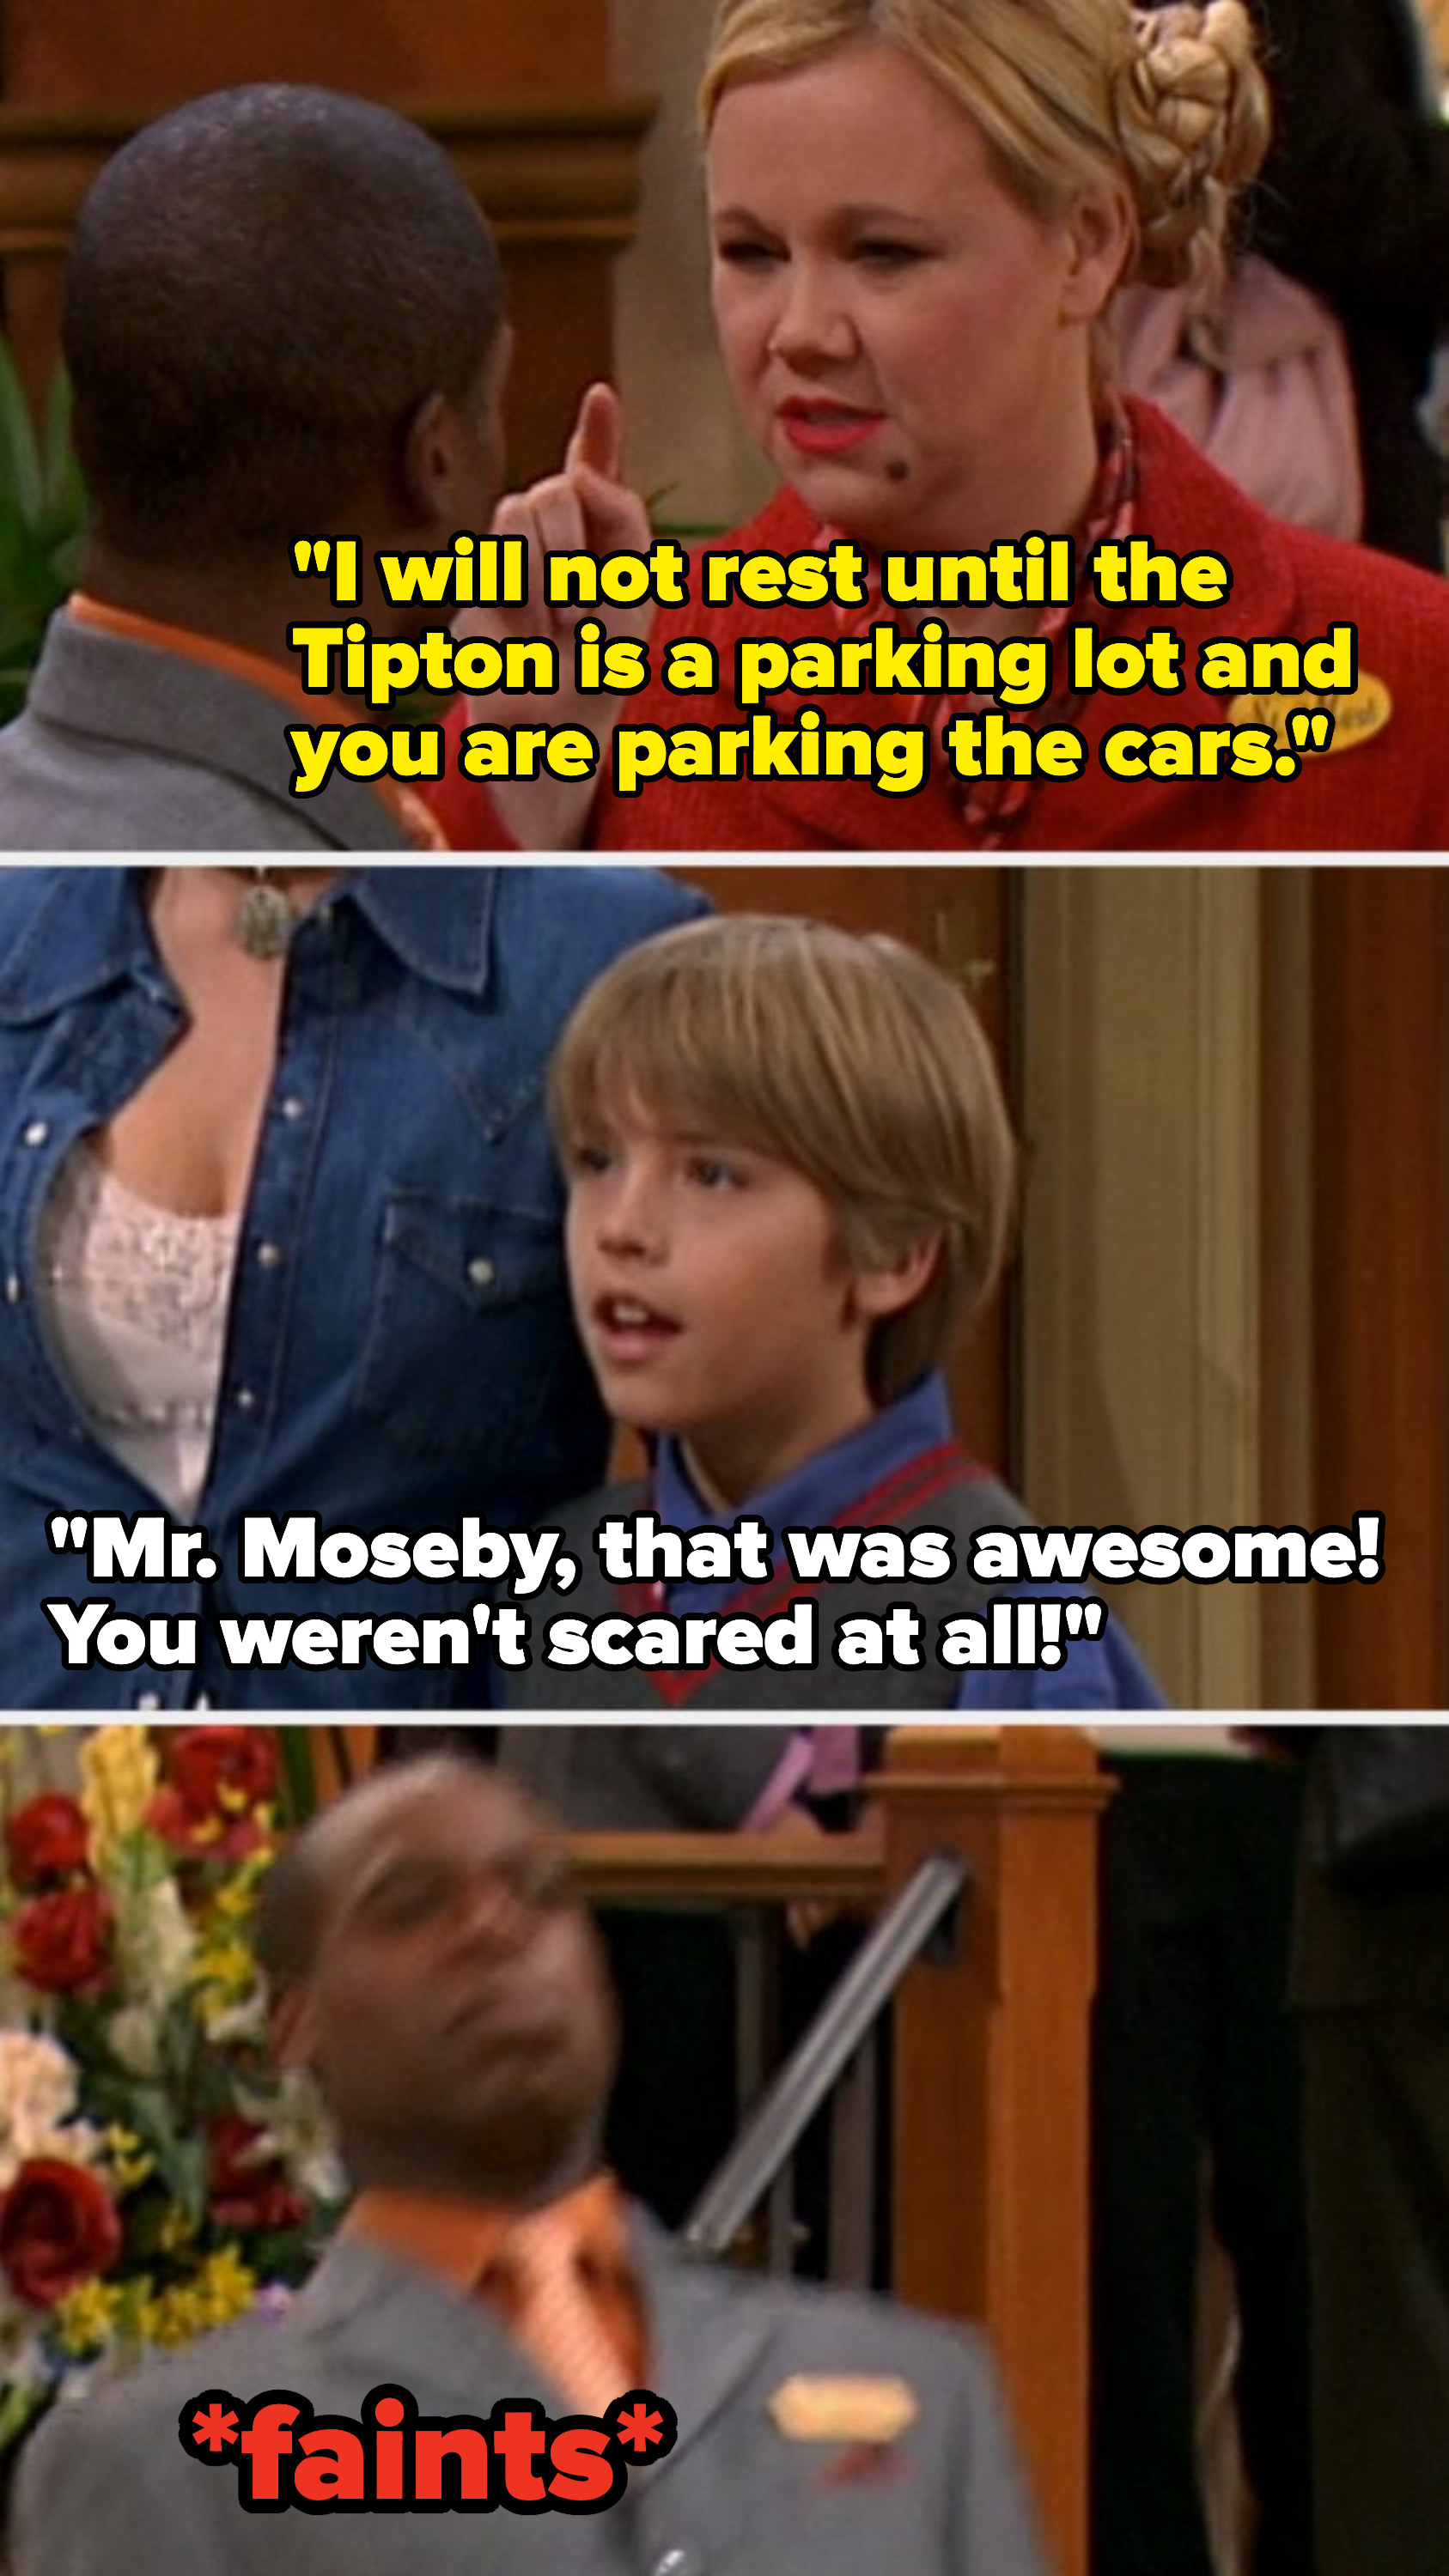 Mr. Moseby fanits from fear when Ilsa visits the Tipton lobby